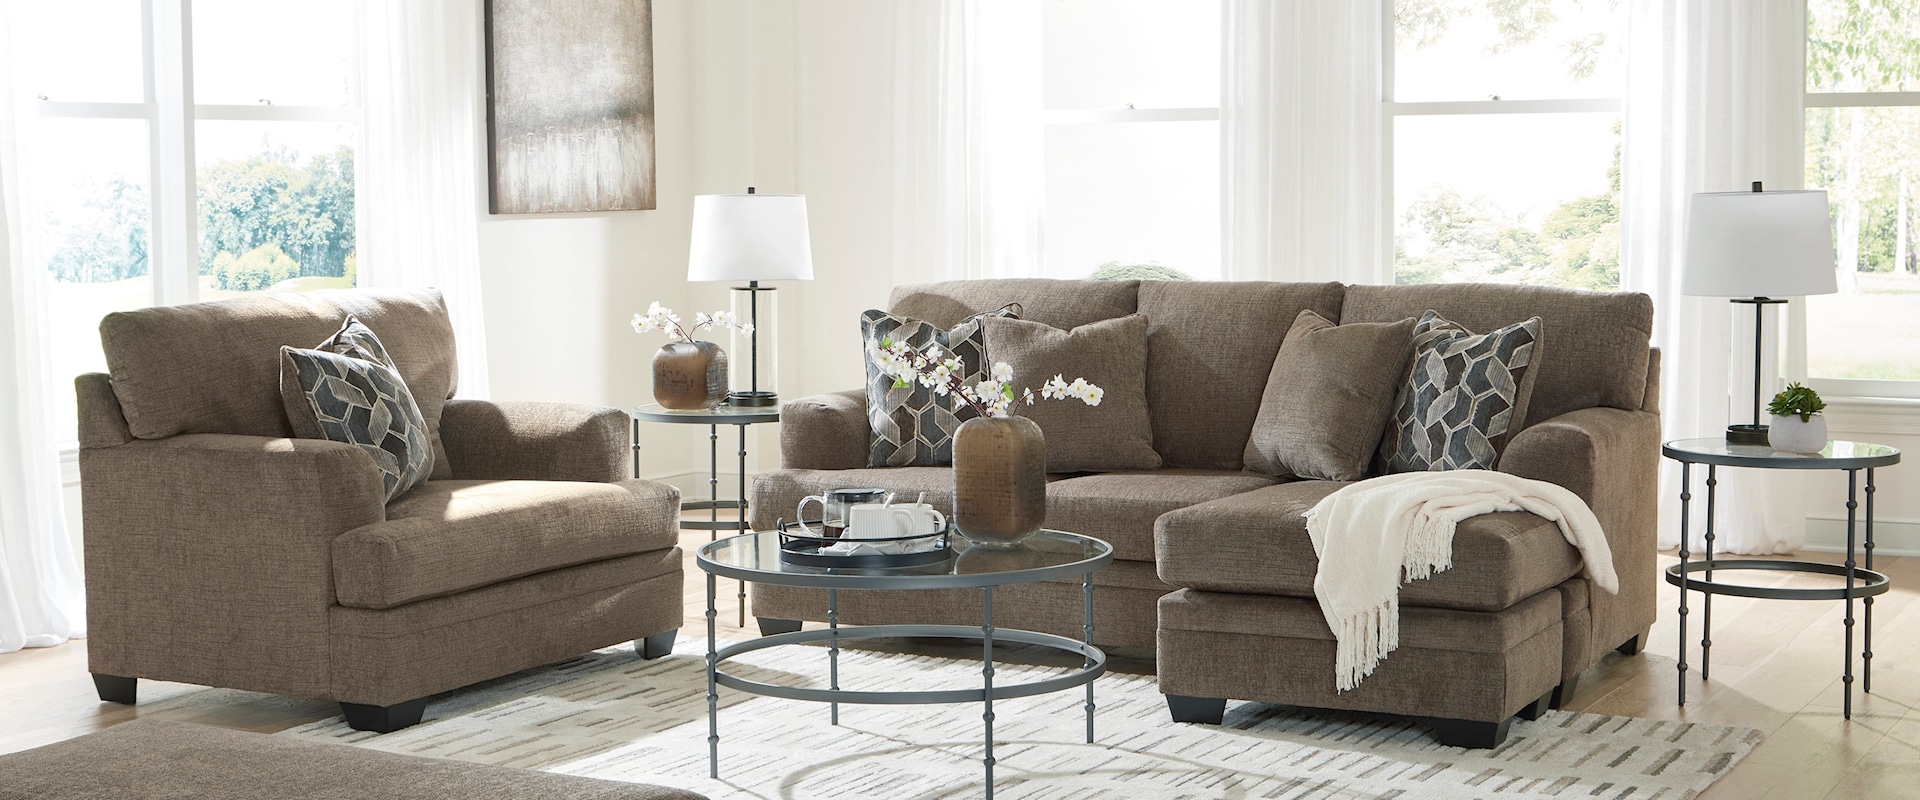 Sofa Chaise, Oversized Chair And Ottoman